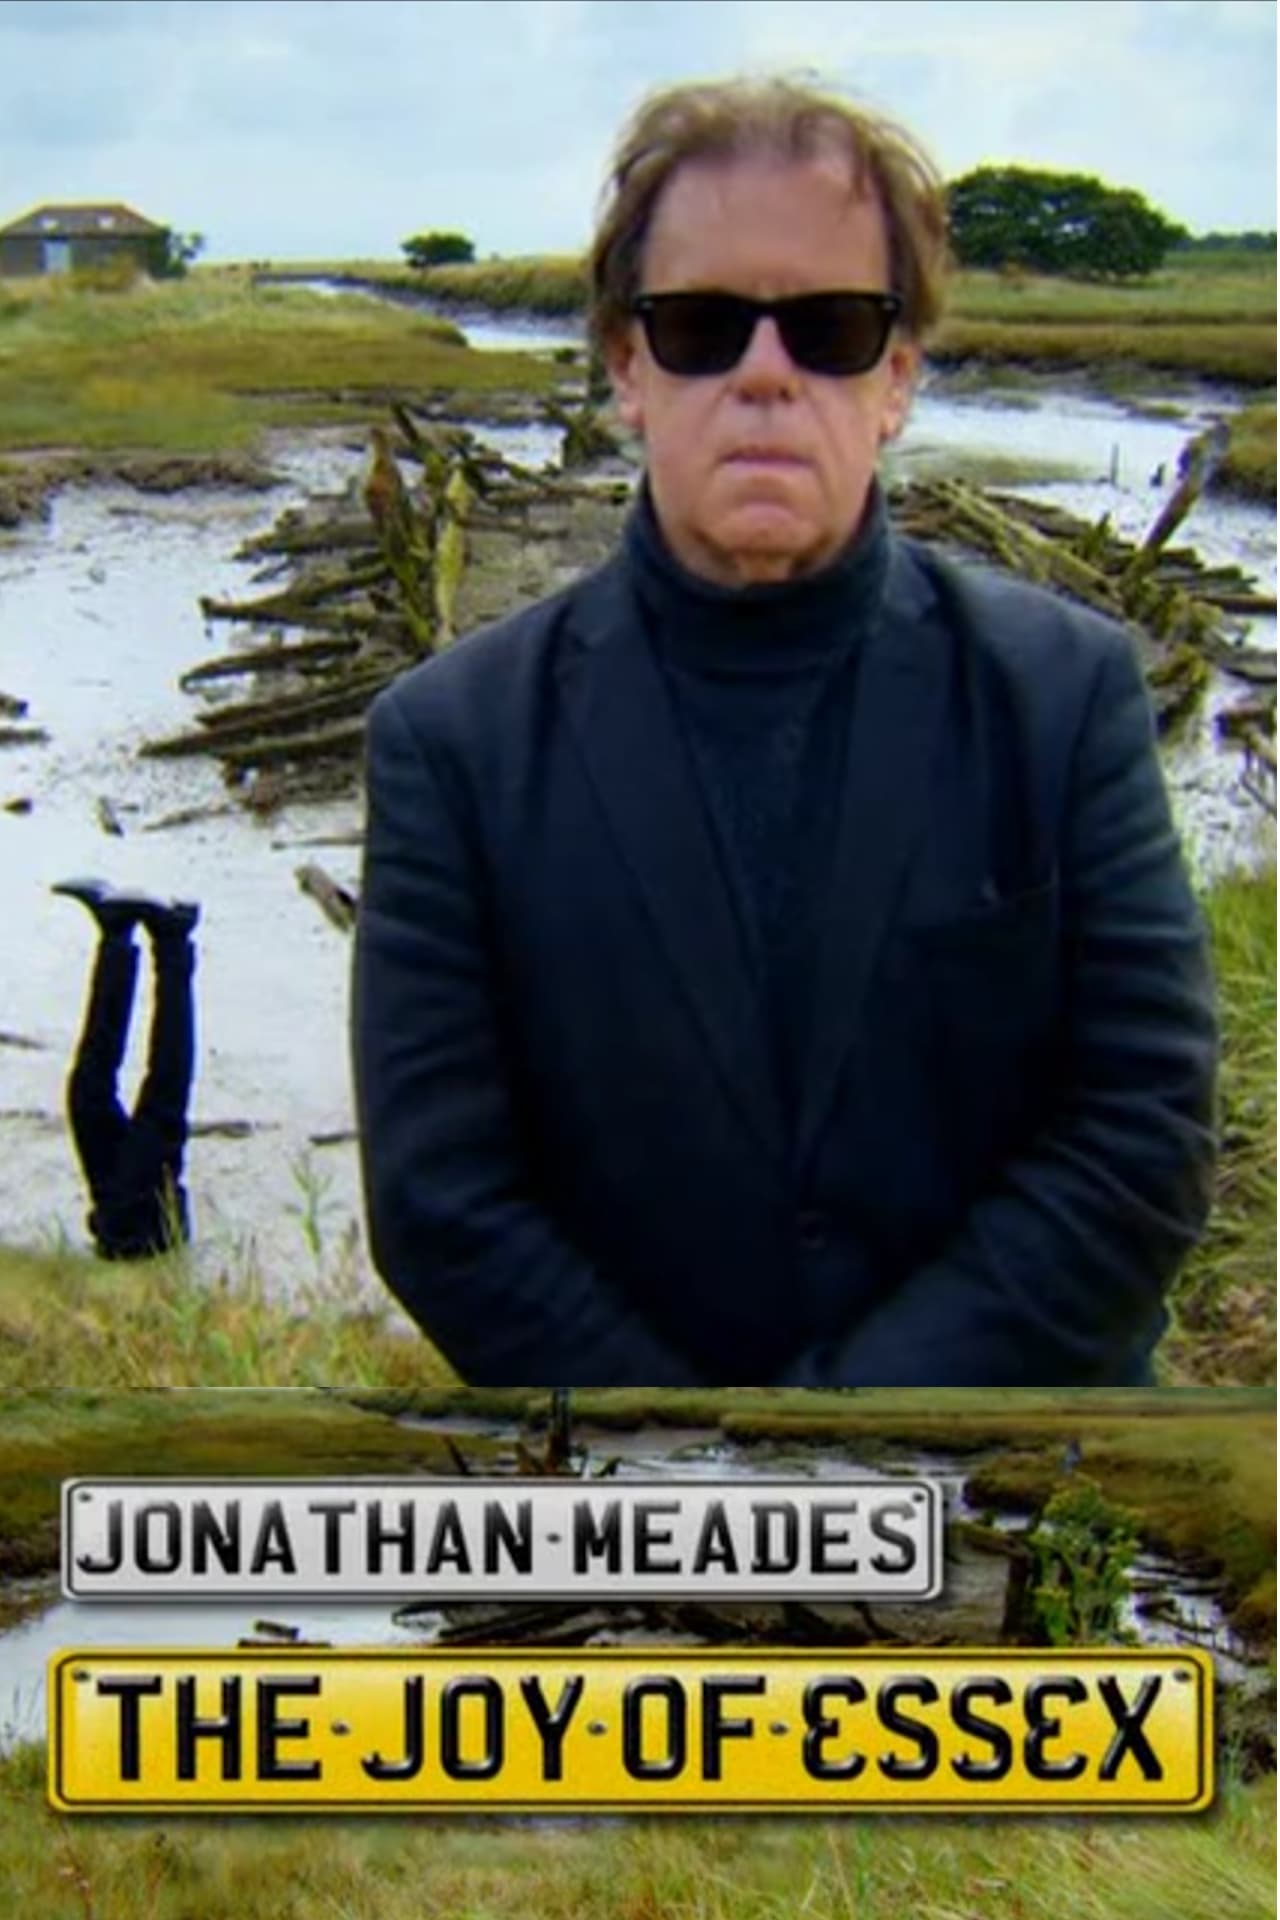 The Joy of Essex with Jonathan Meades